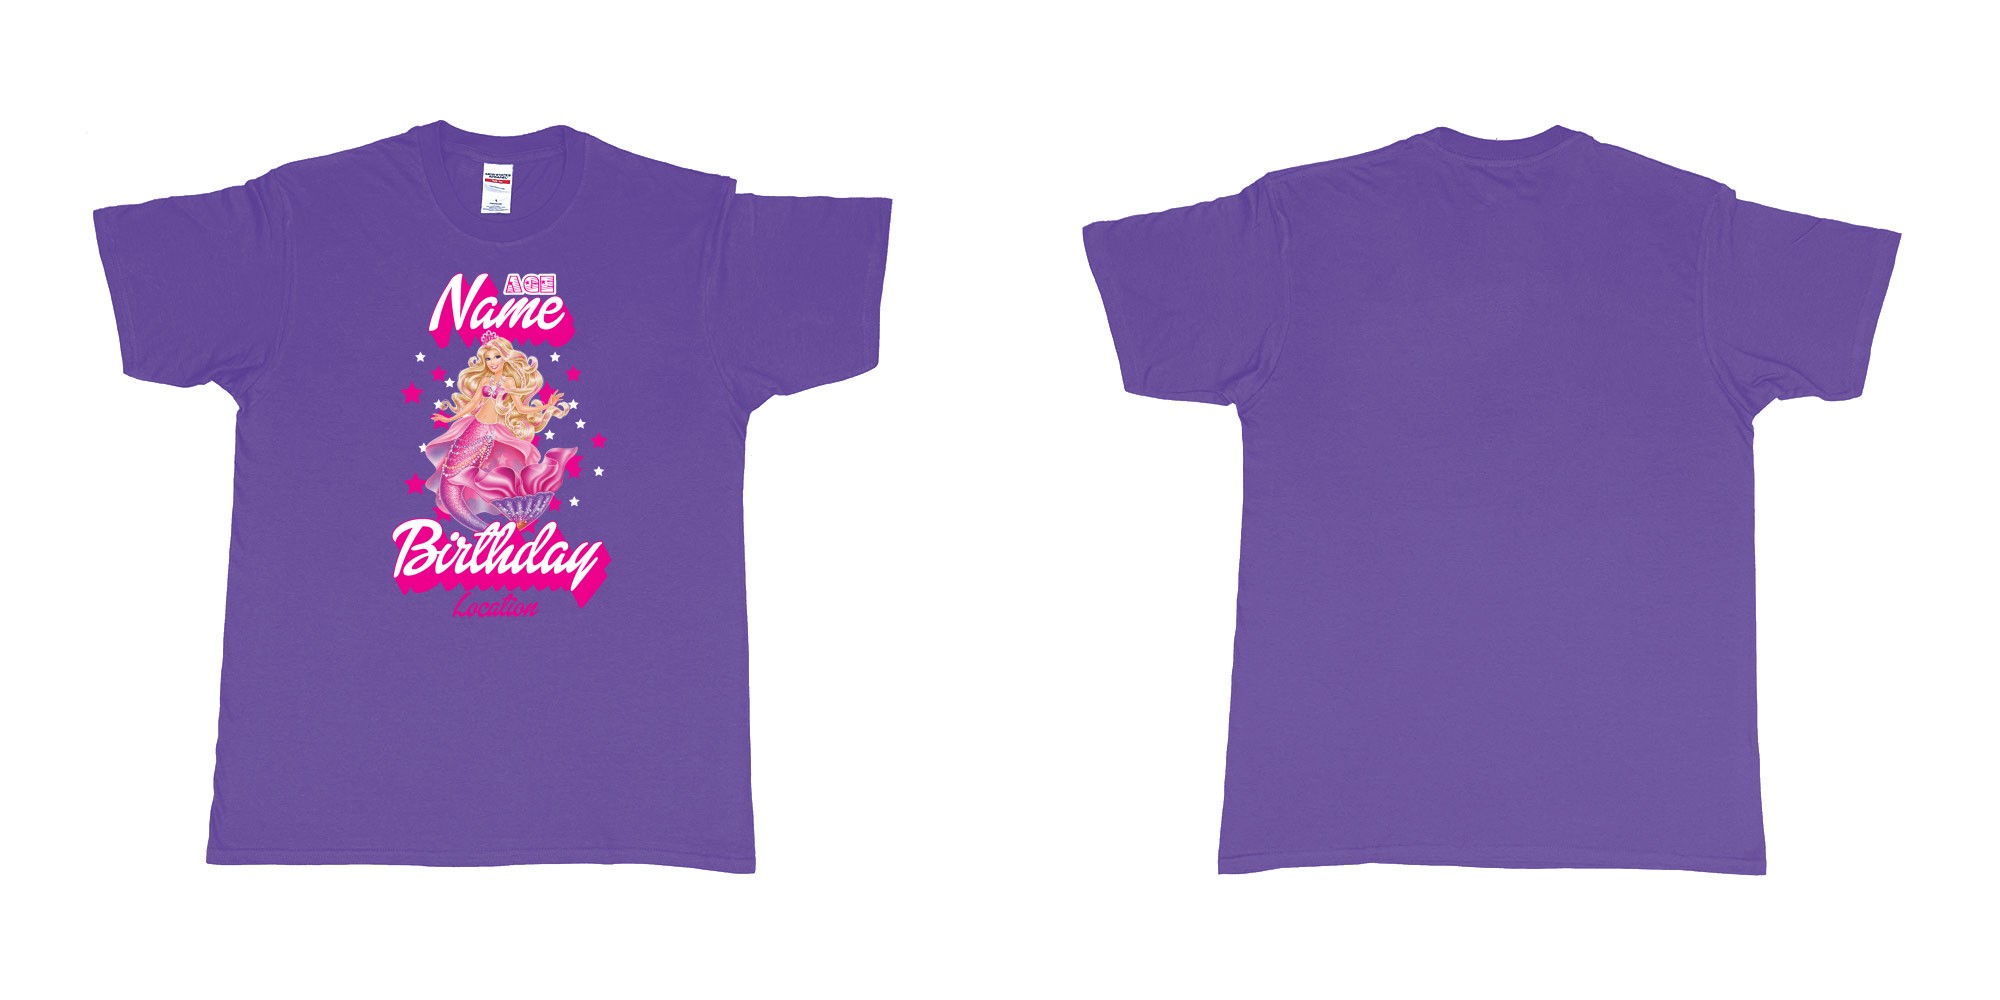 Custom tshirt design barbie mermaid custom name birthday in fabric color purple choice your own text made in Bali by The Pirate Way